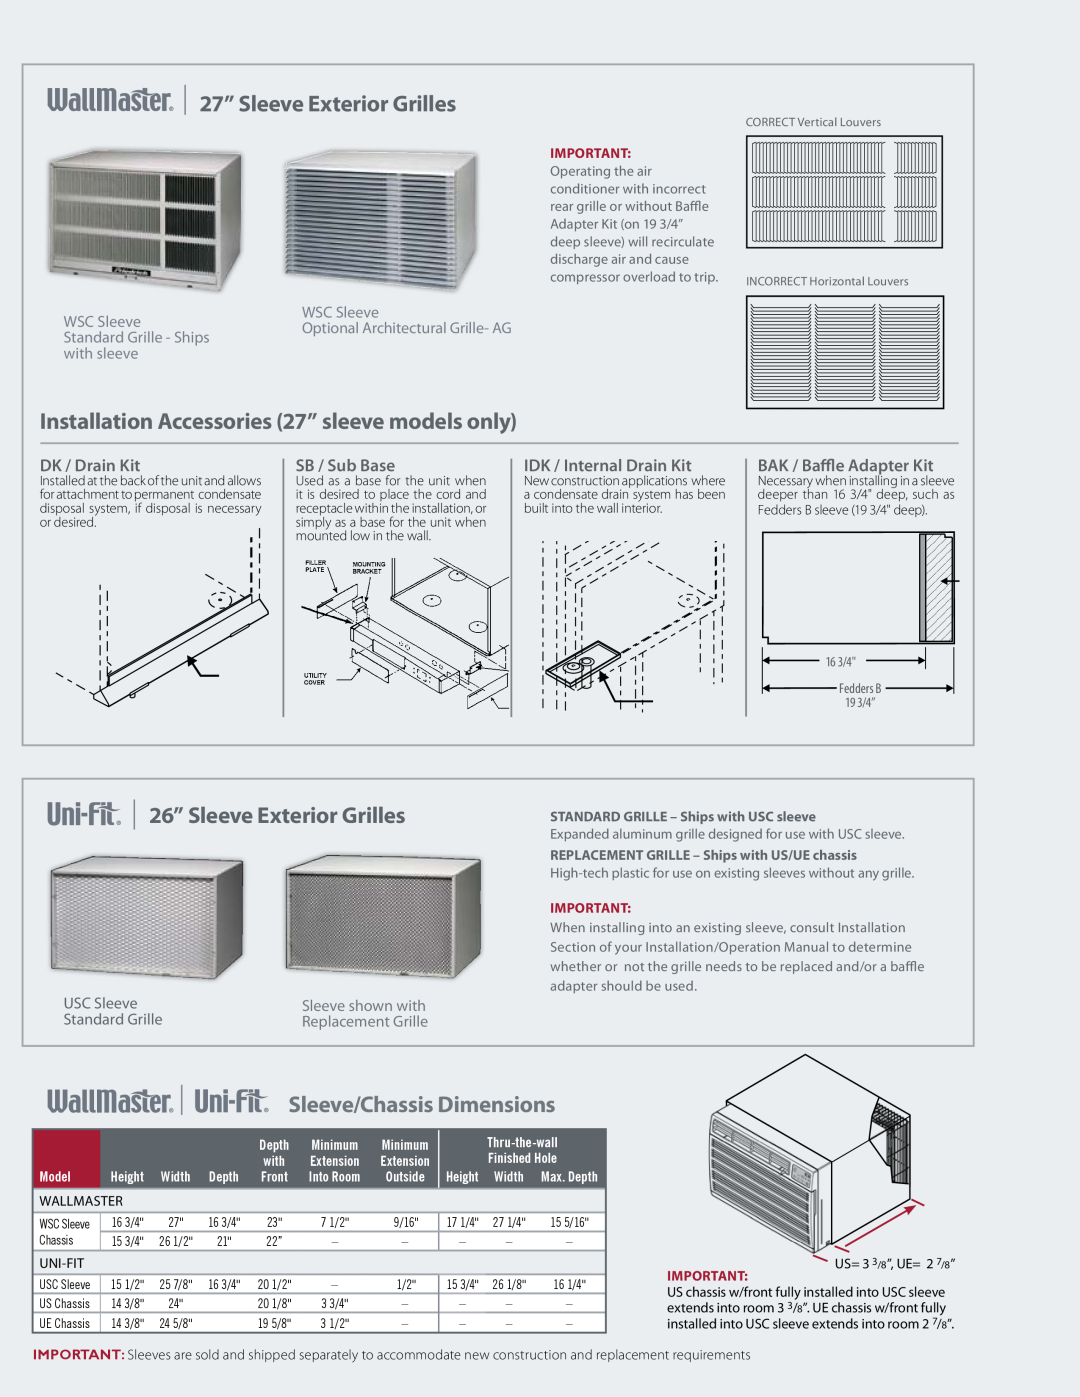 Friedrich Thru-the-Wall Air Conditioners Sleeve/Chassis Dimensions, 27” Sleeve Exterior Grilles, DK / Drain Kit, 16 3/4 